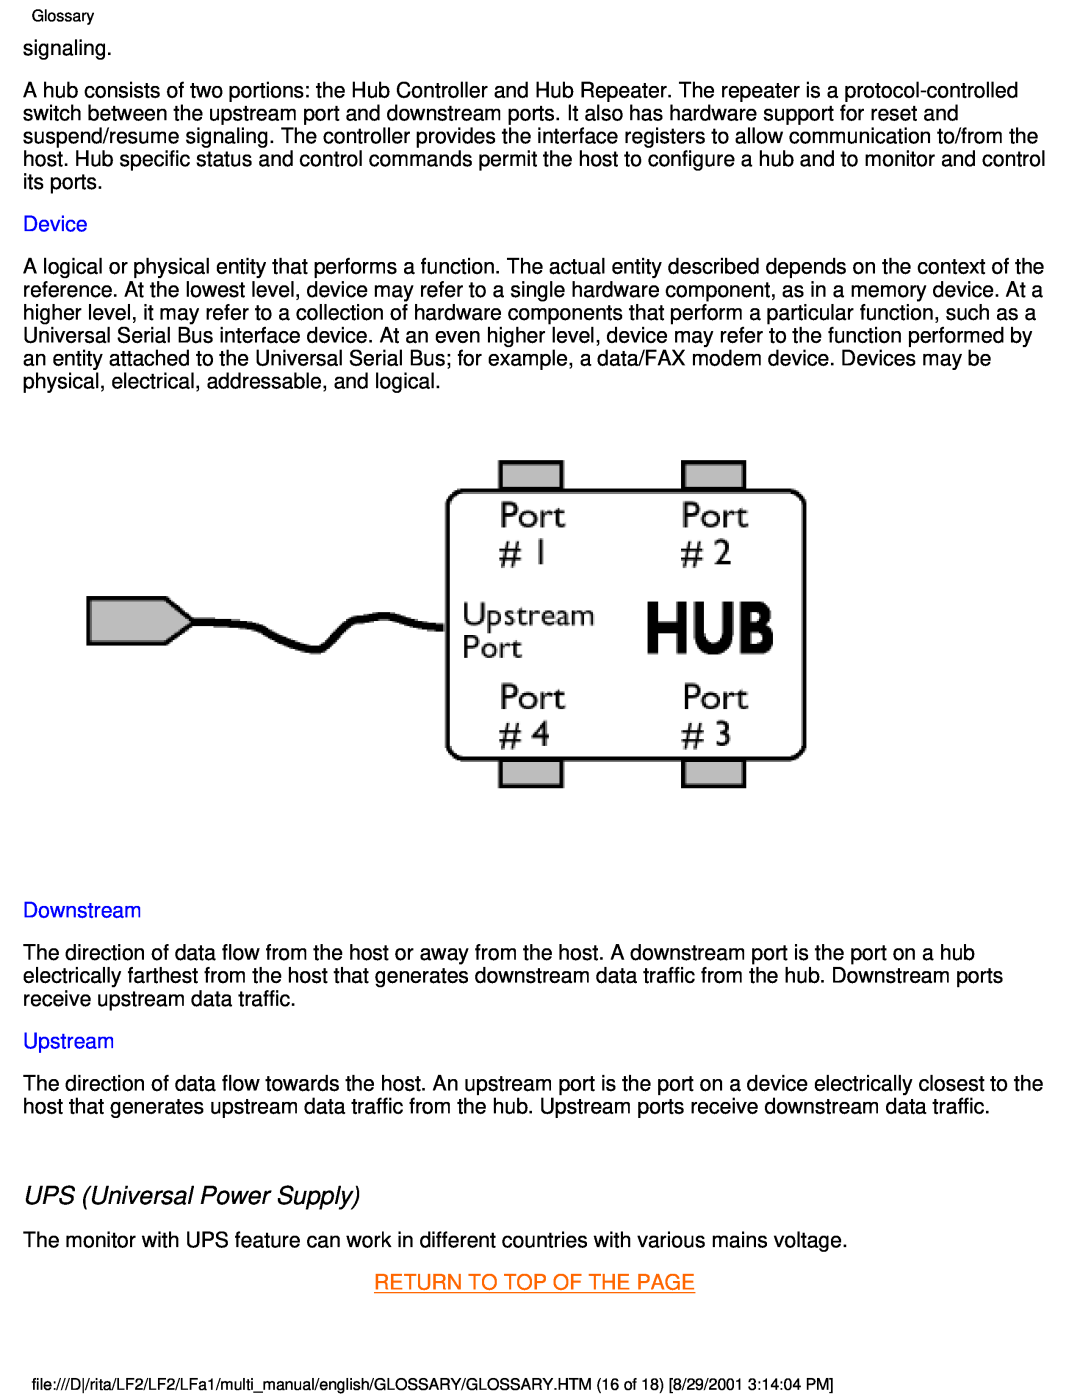 Philips 201P user manual UPS Universal Power Supply, Device, Downstream, Upstream, Return To Top Of The Page 